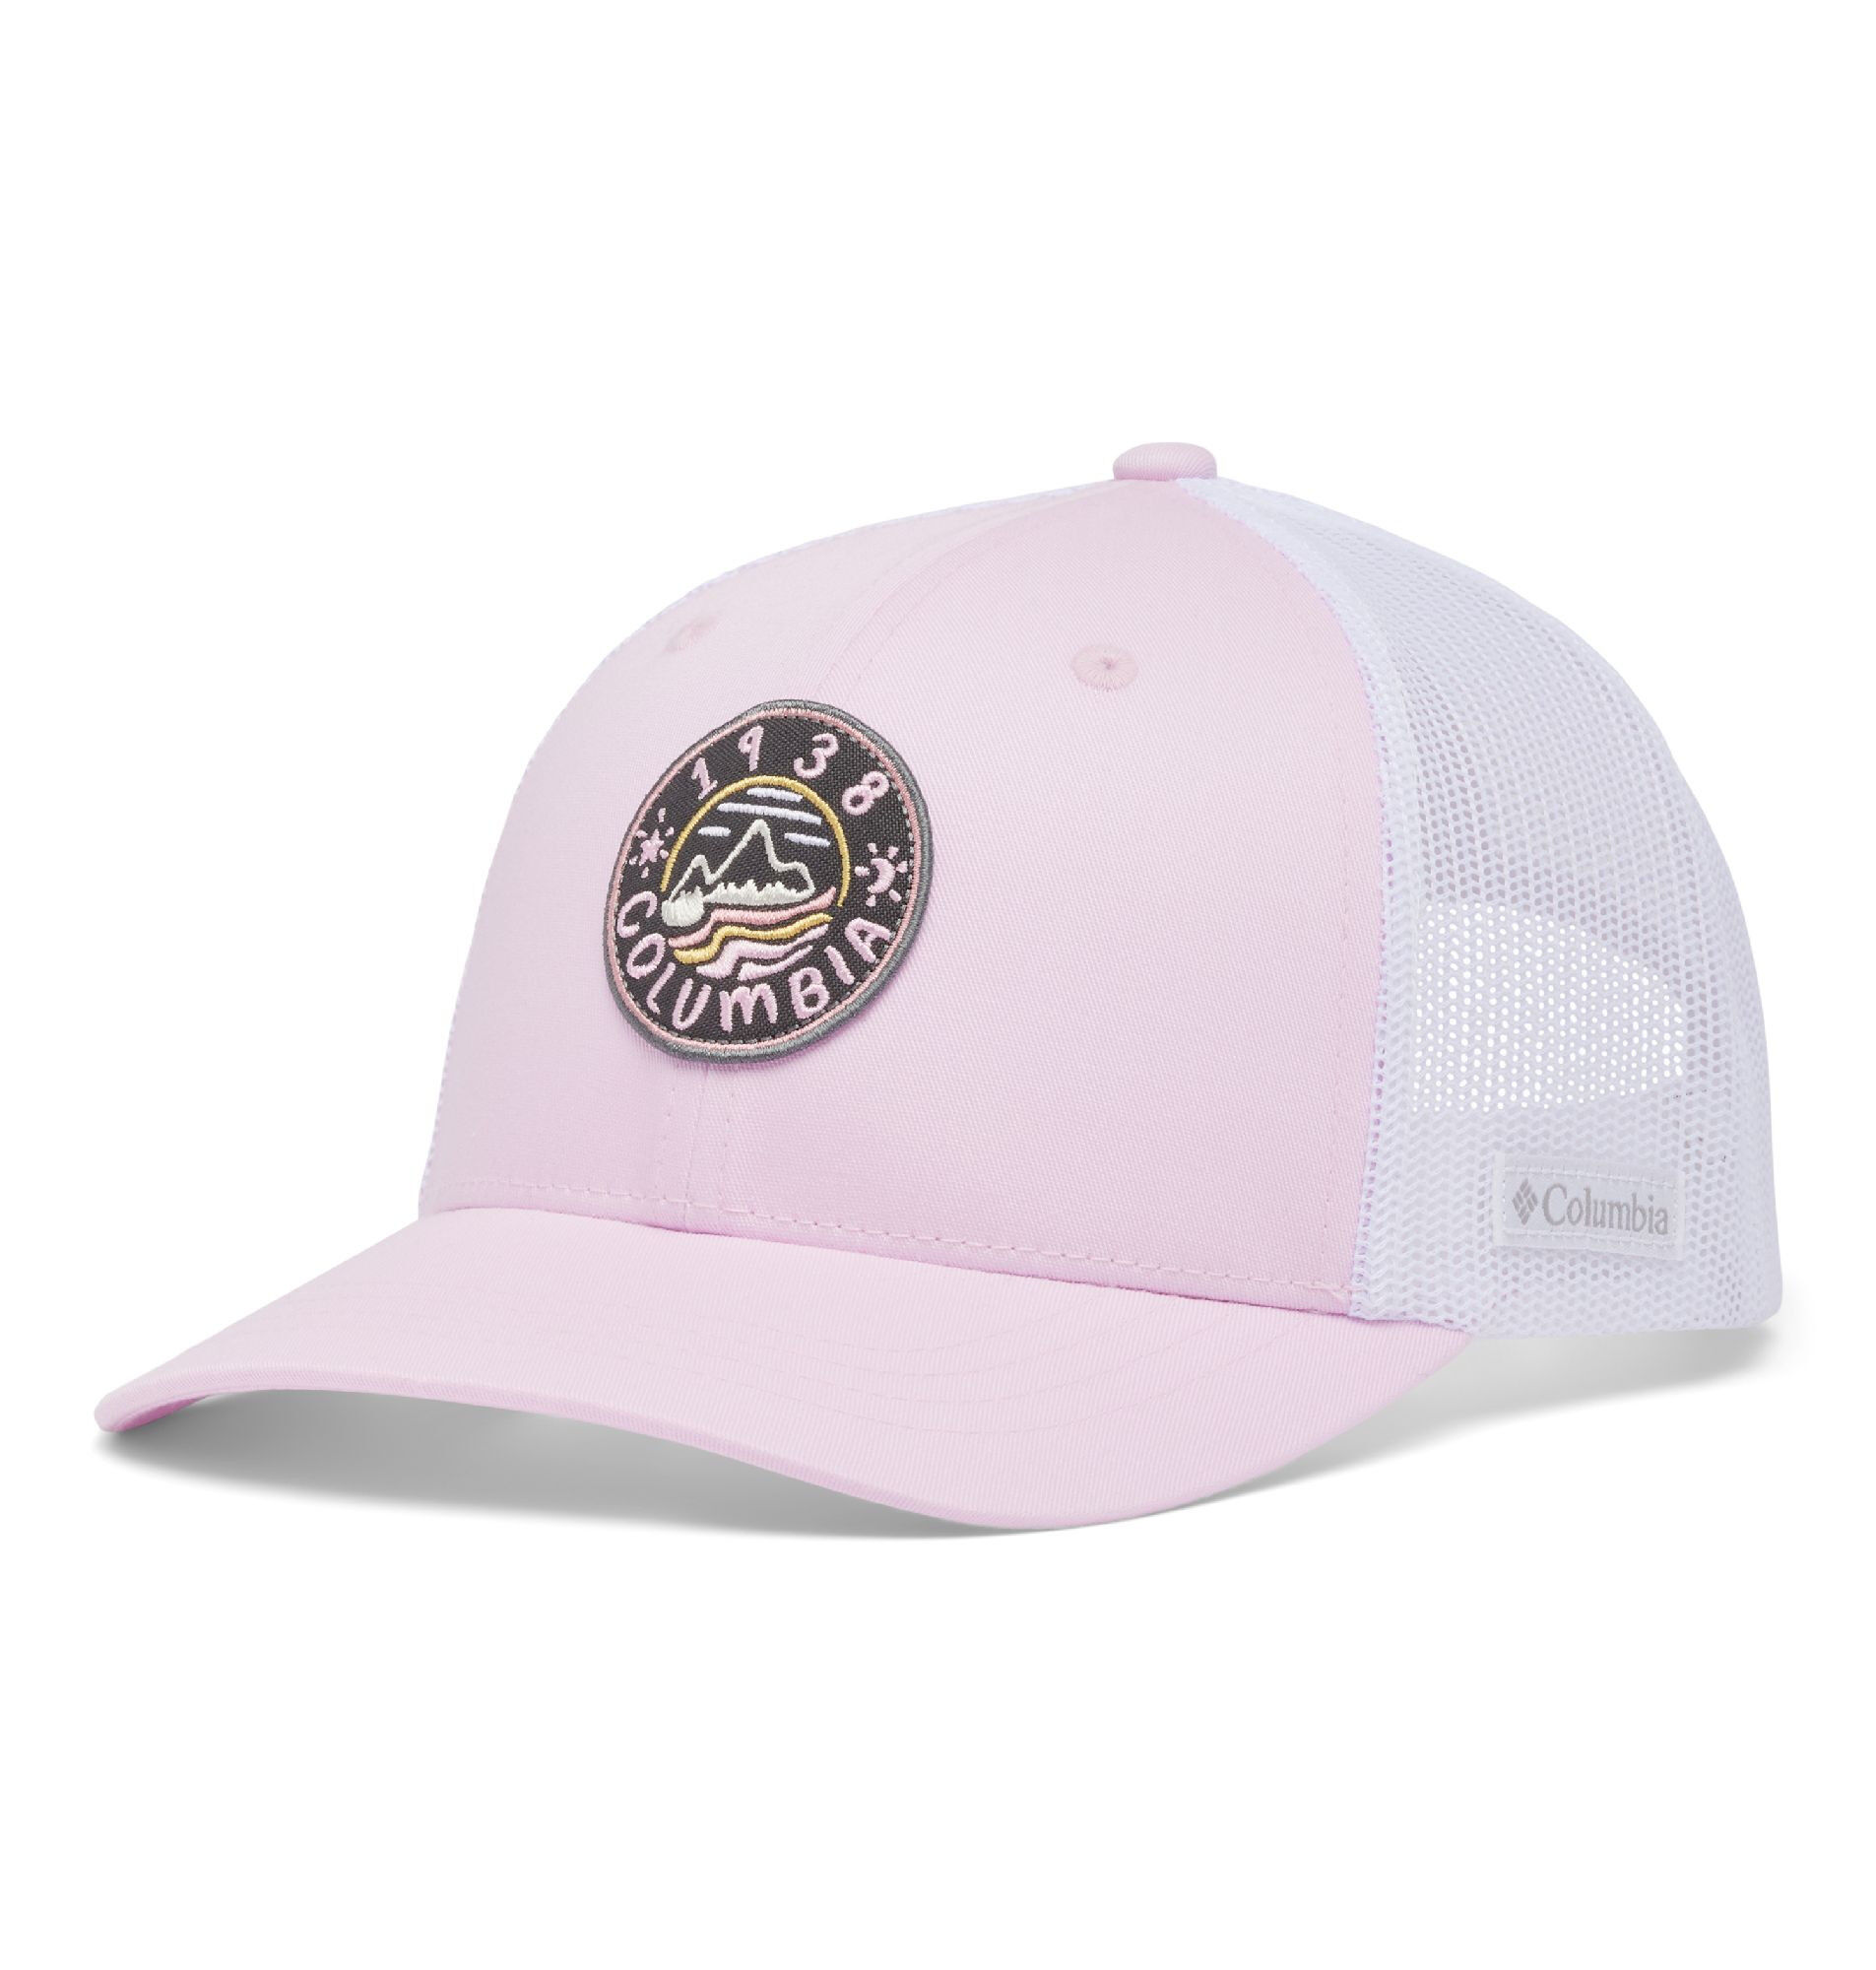 Columbia Youth Snap Back - Casquette enfant